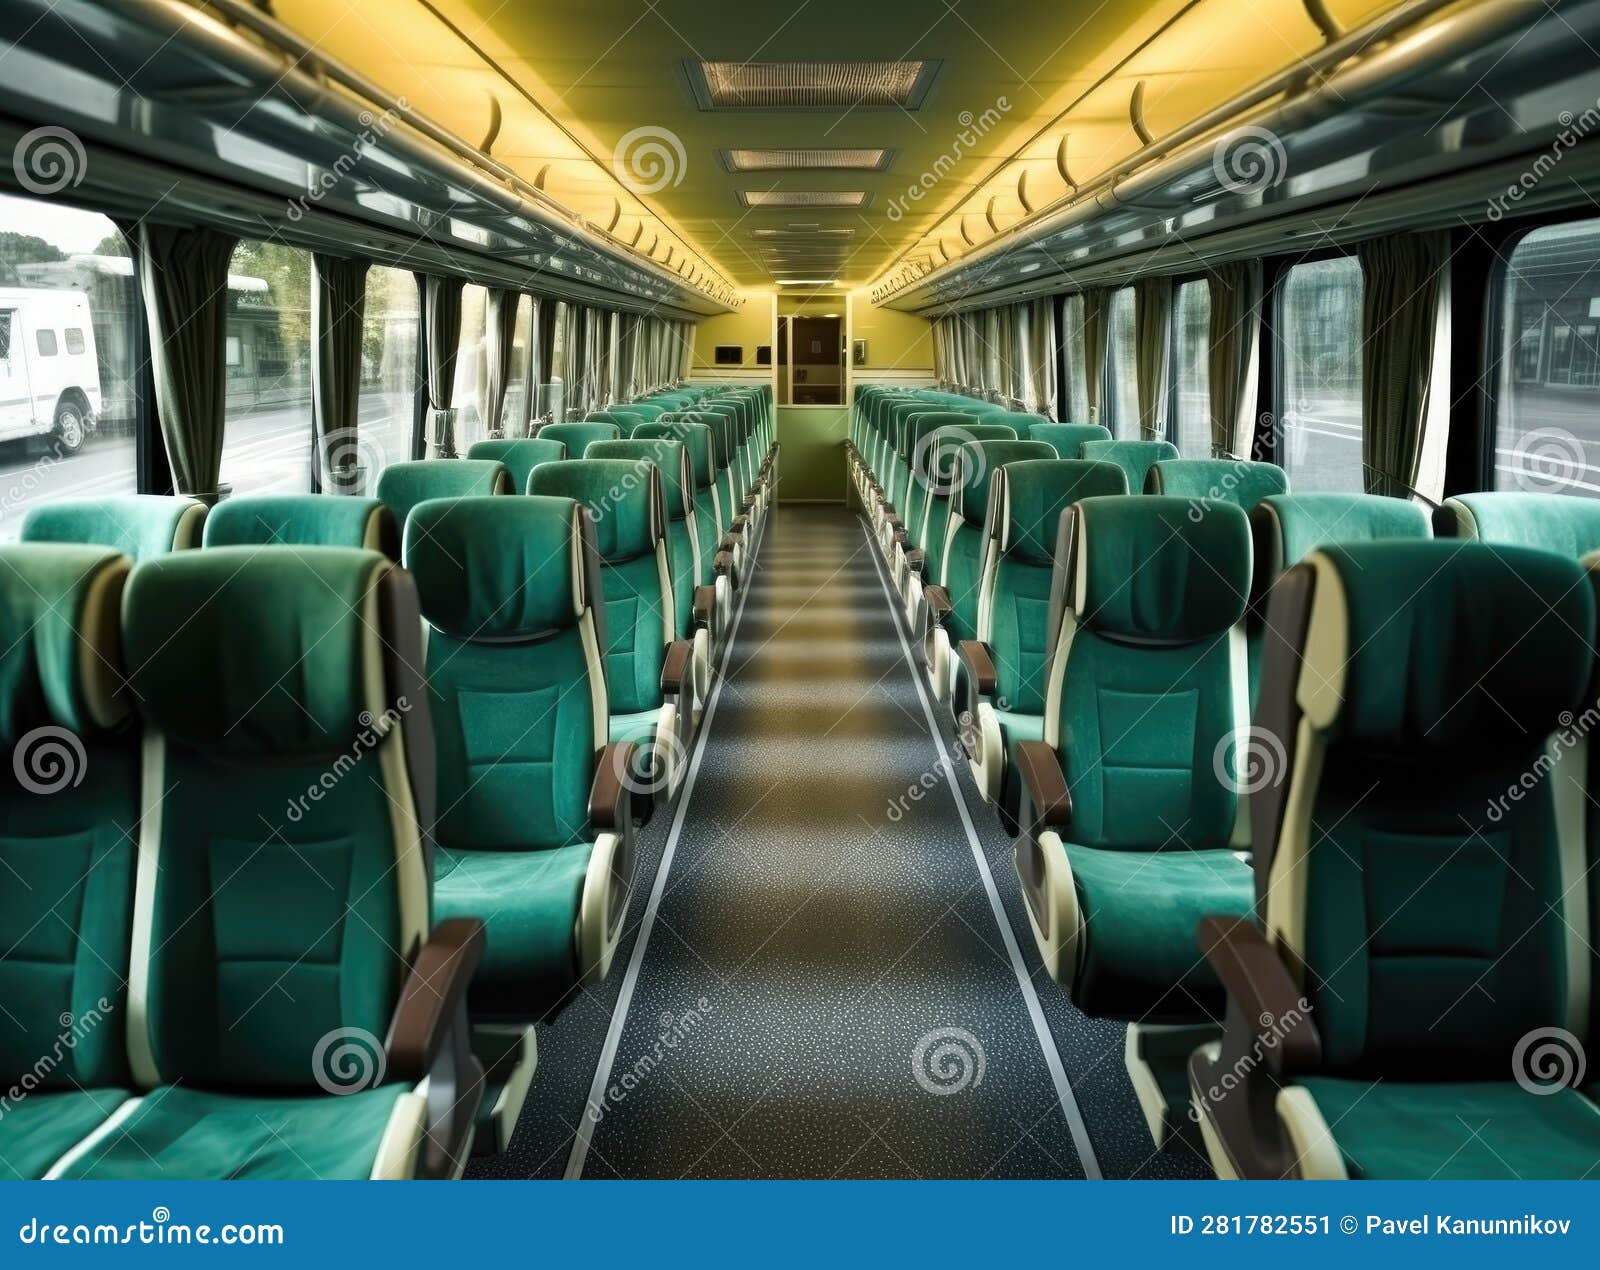 image with the interior of border train. a odern train with comfortable and colorful chairs. created with generative ai technology